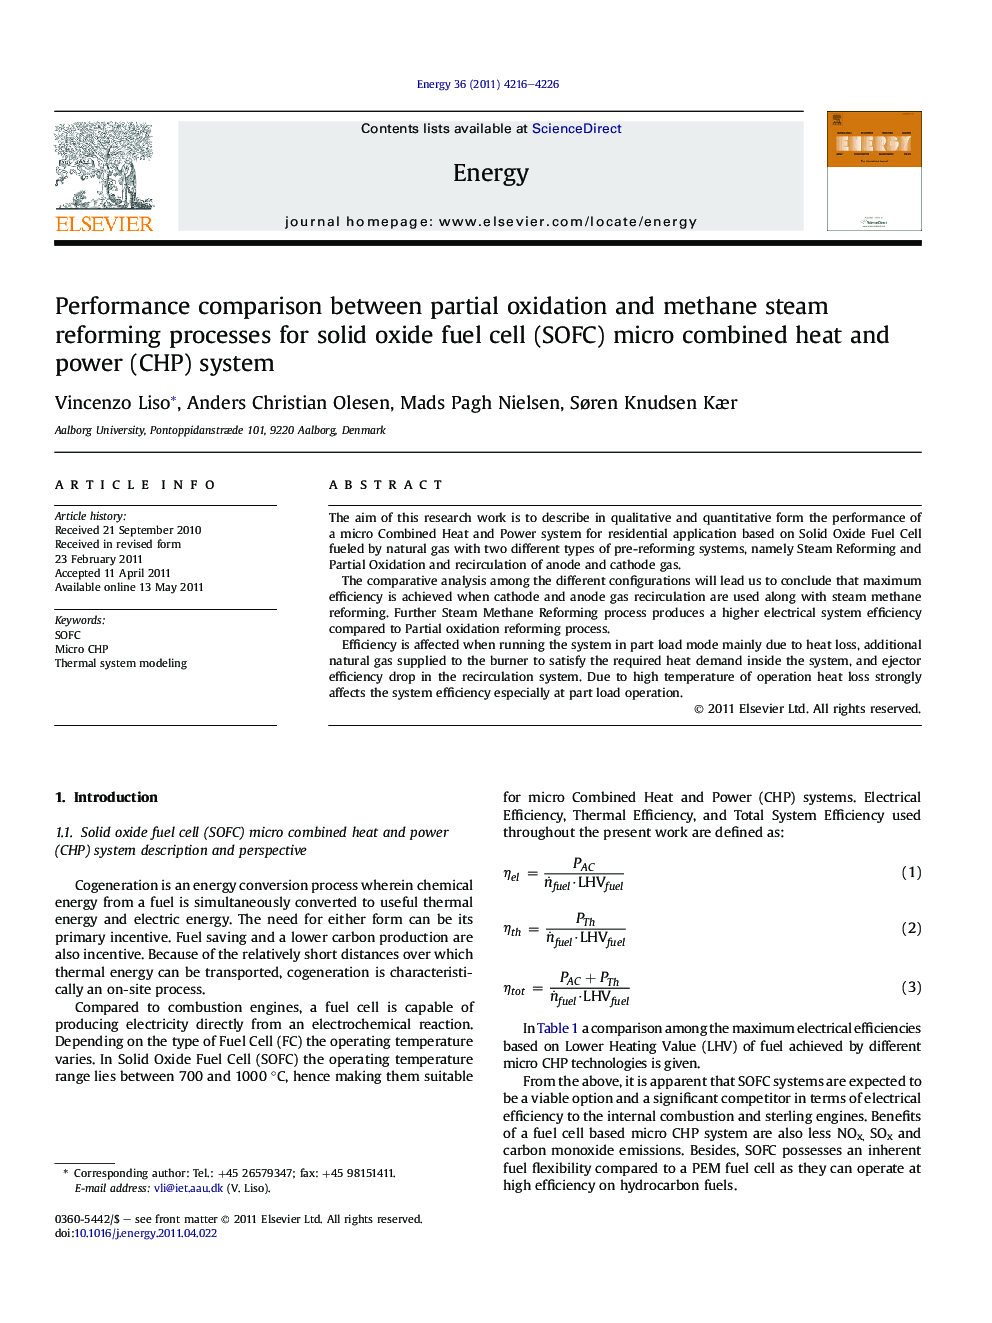 Performance comparison between partial oxidation and methane steam reforming processes for solid oxide fuel cell (SOFC) micro combined heat and power (CHP) system